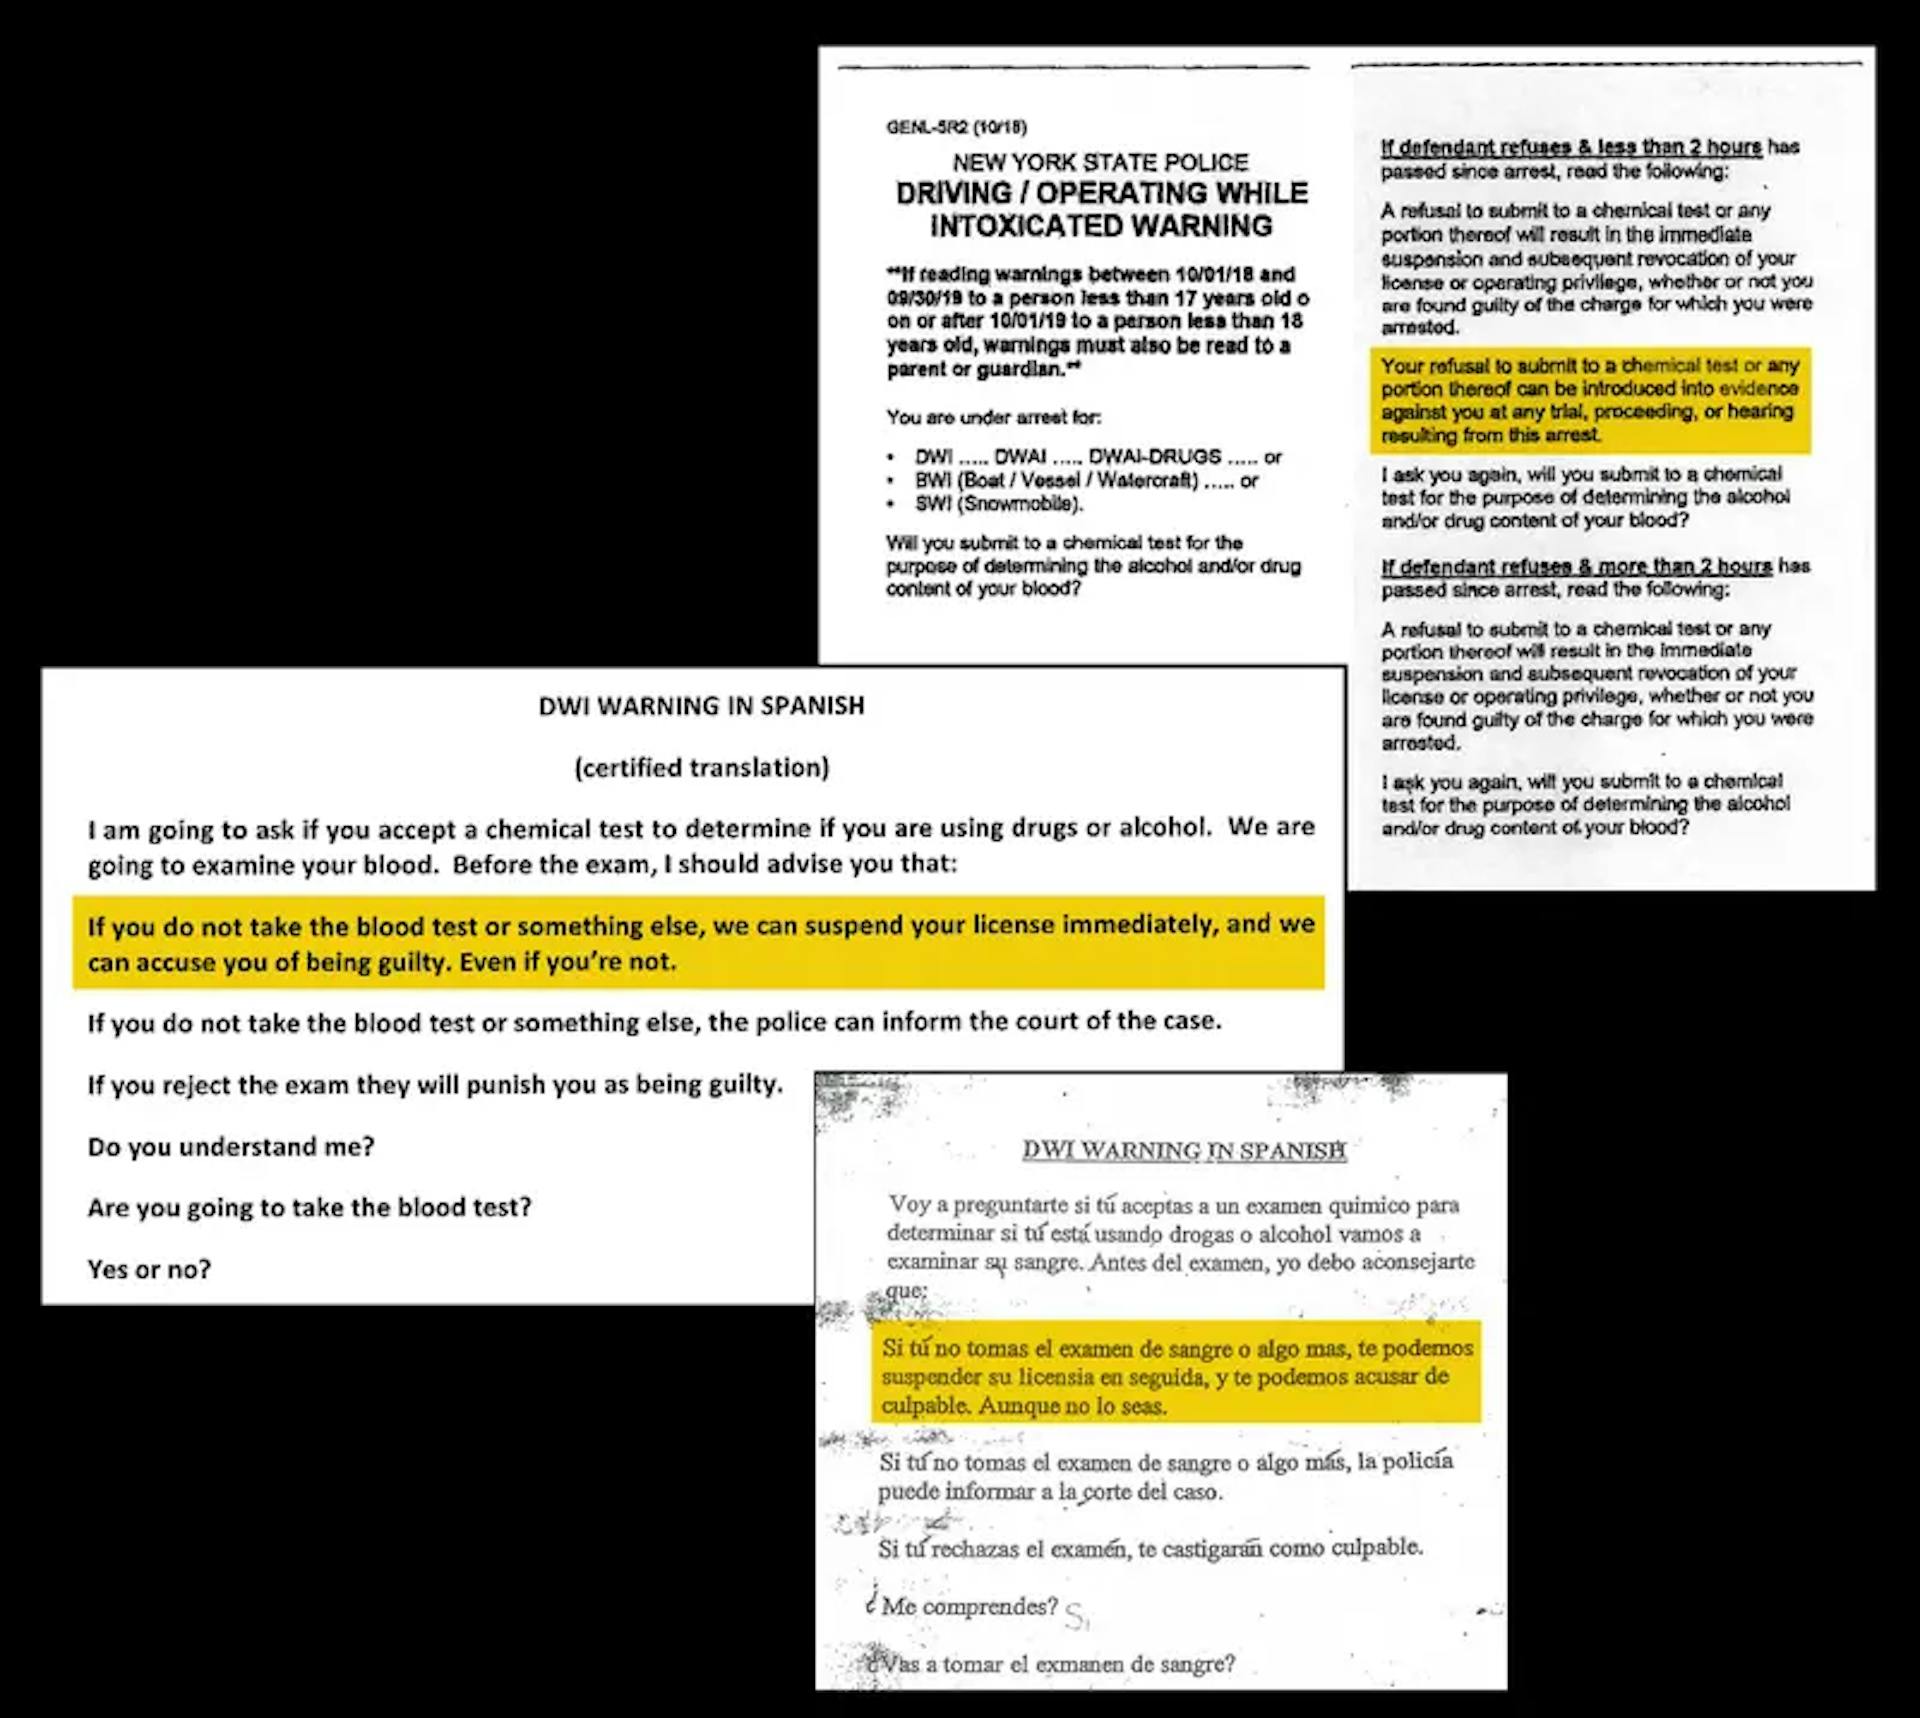 Counterclockwise from top: An accurately phrased warning given to motorists about the consequences of refusing a blood alcohol test; an English translation of the Spanish version that was given to drivers who didn’t speak English; and the mistranslated Spanish version that drivers received, which included several confusing and incorrect passages that do not exist in the original English warning. Credit: Highlighted by ProPublica